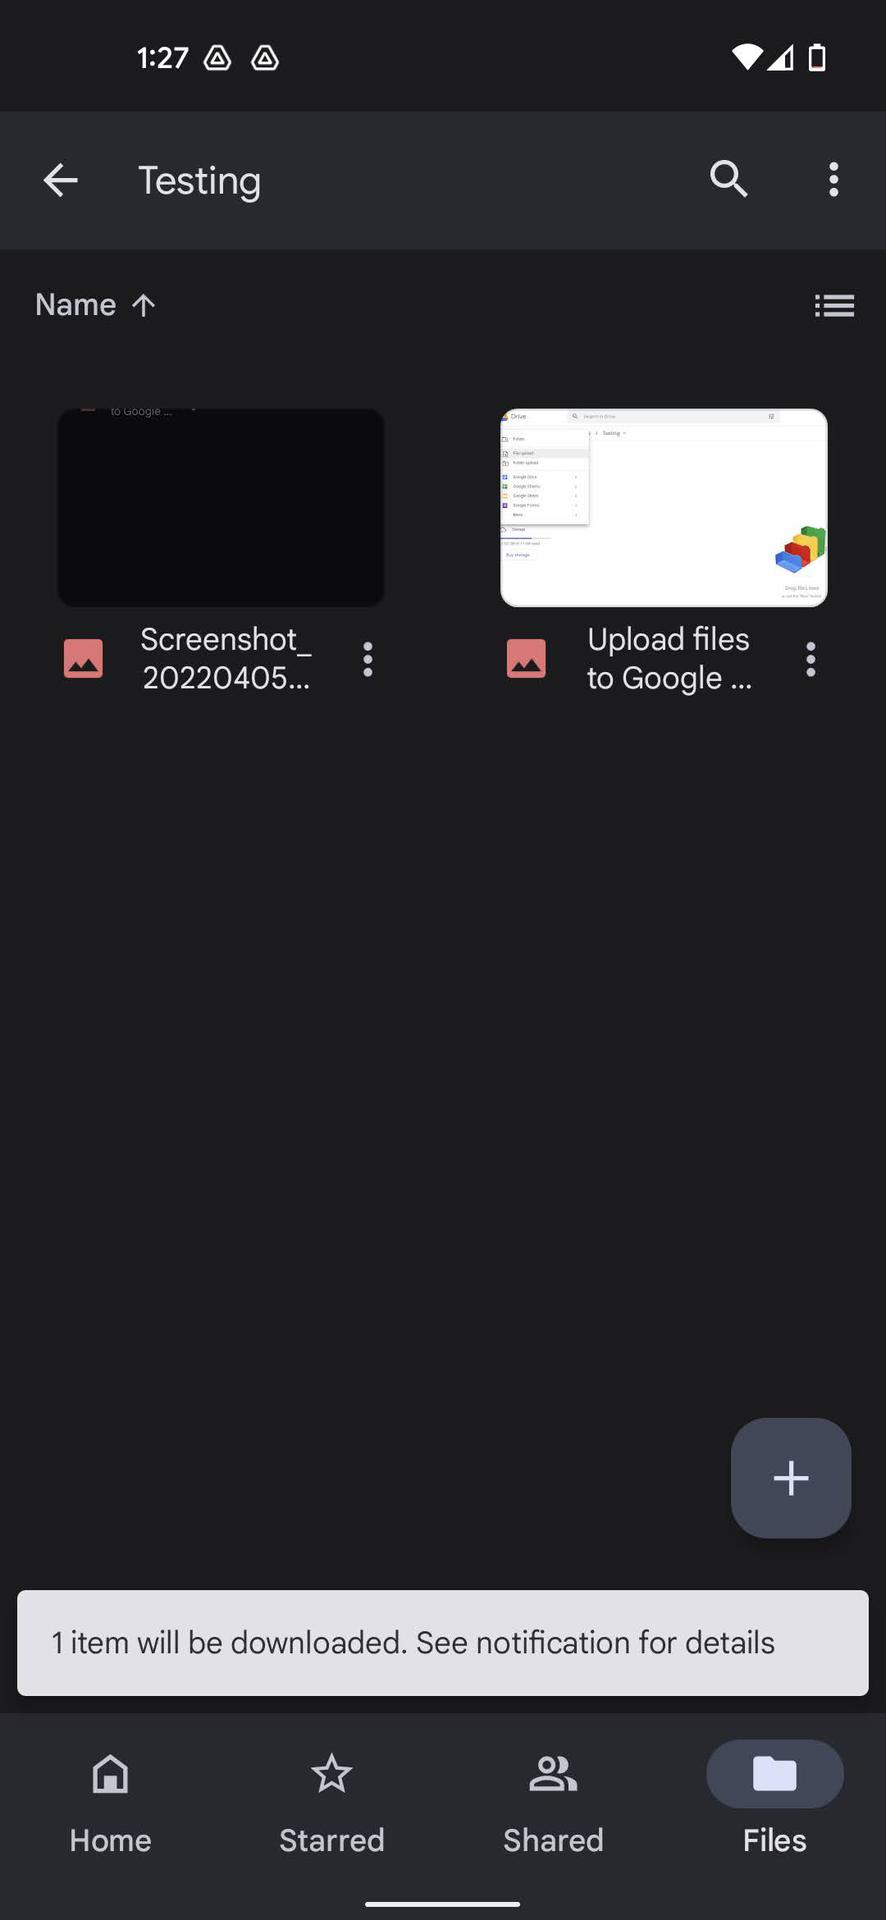 Download files from Google Drive on Android 3